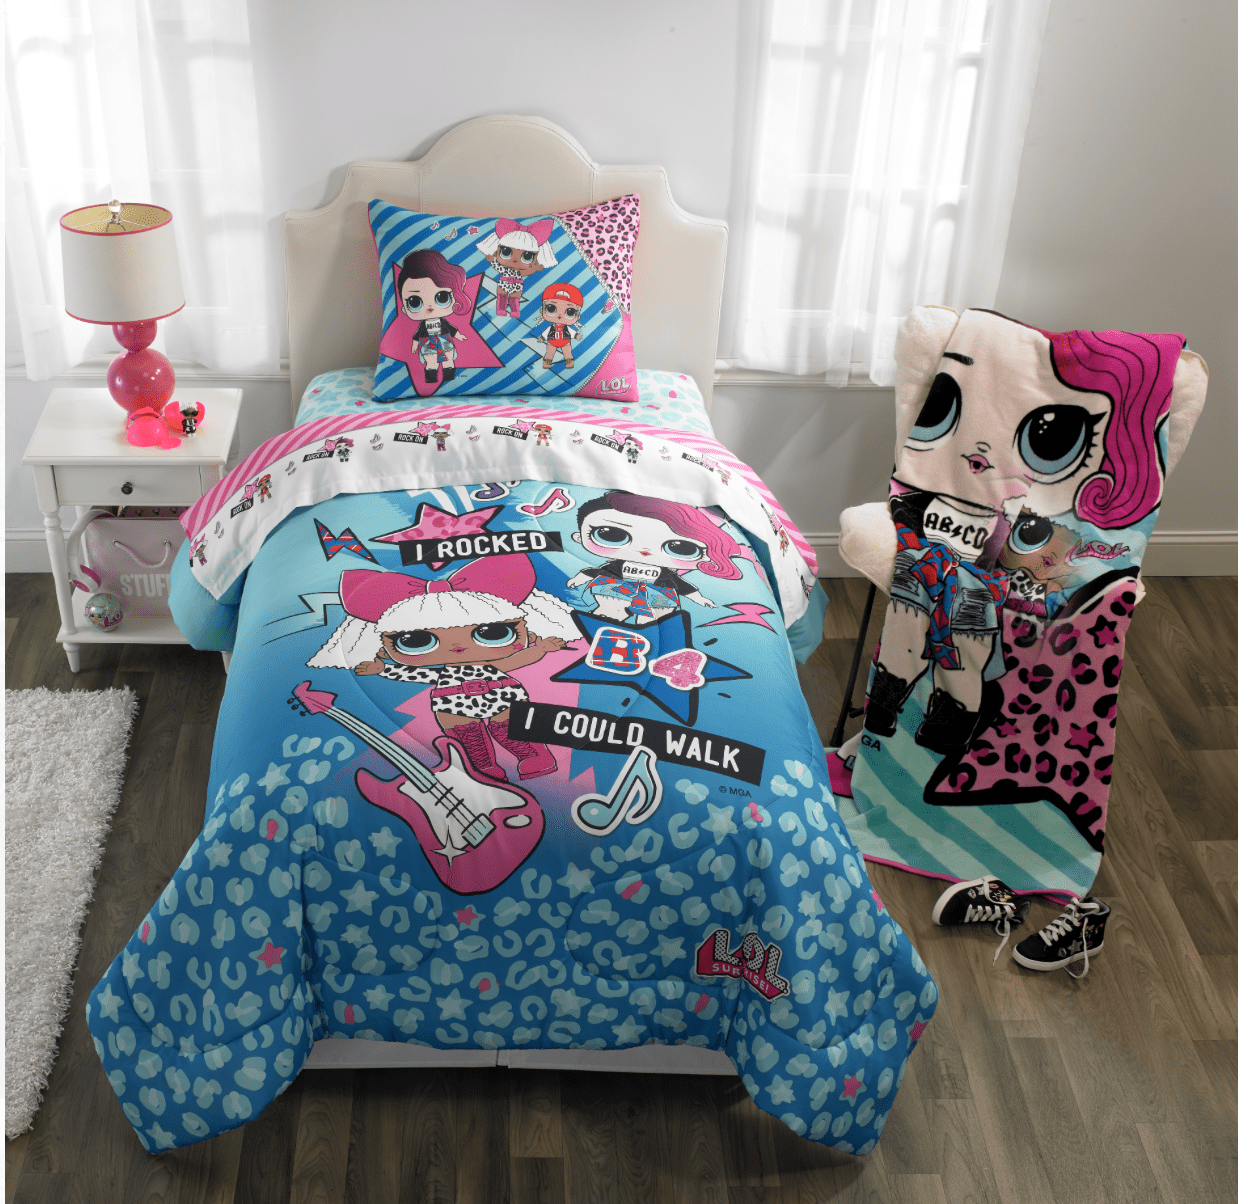 LOL Surprise 4 Piece Twin Bedding Set Bed in Bag Comforter Sheets Tote 2dayShip 